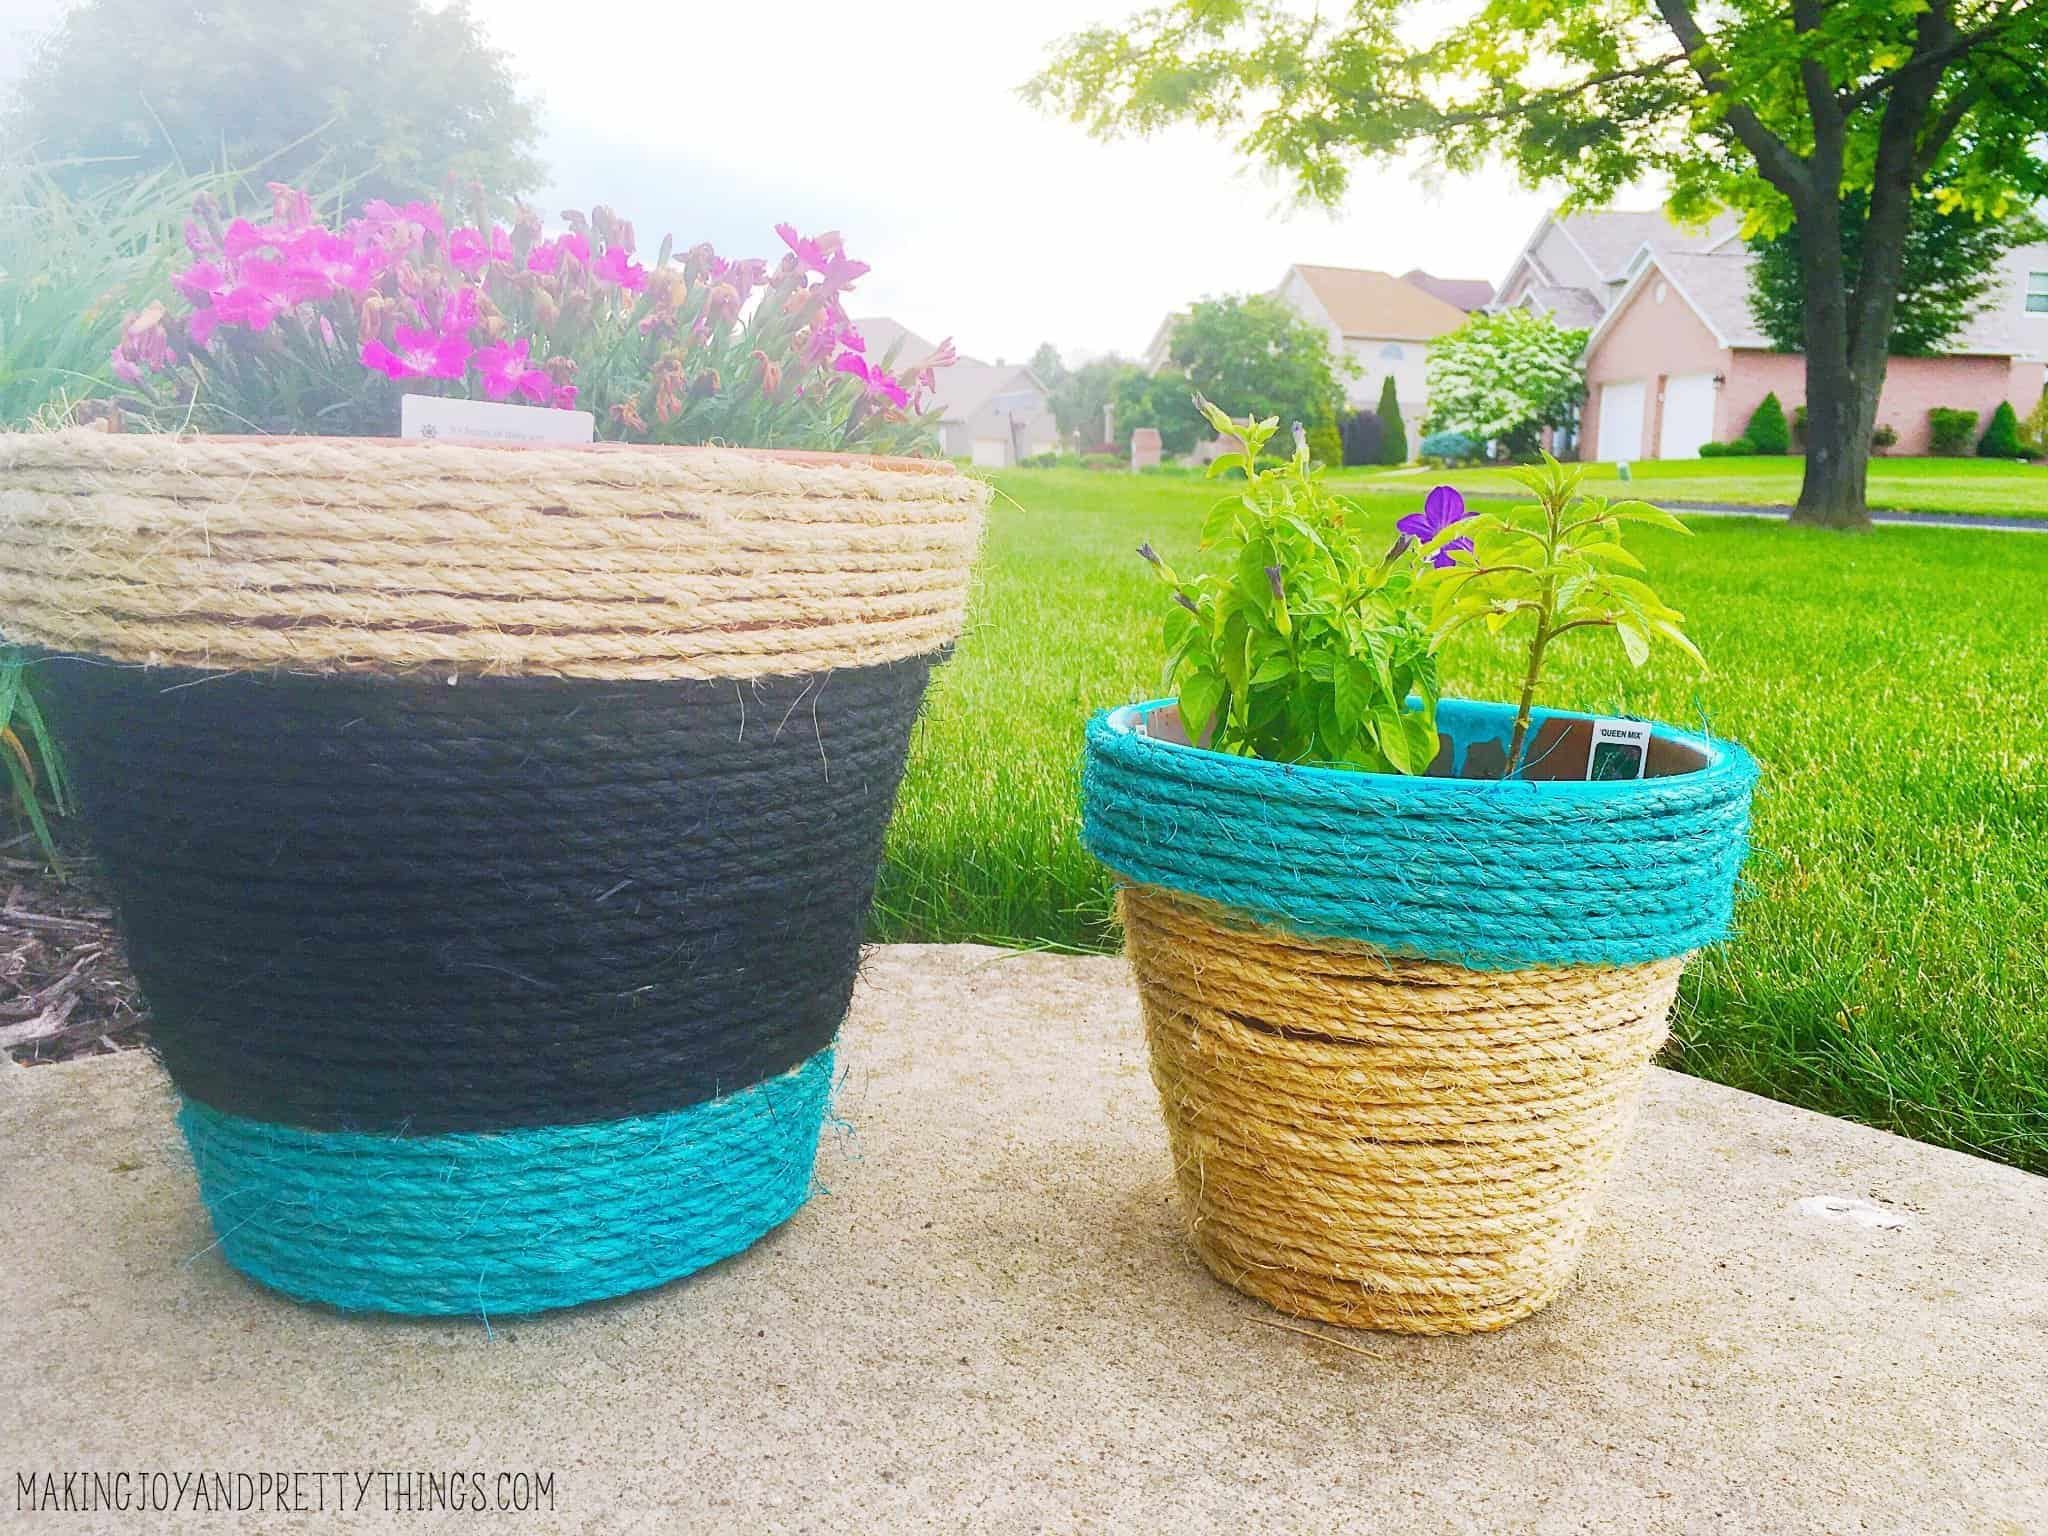 Rope planters that have been completely transformed with a little DIY ingenuity and hard work.